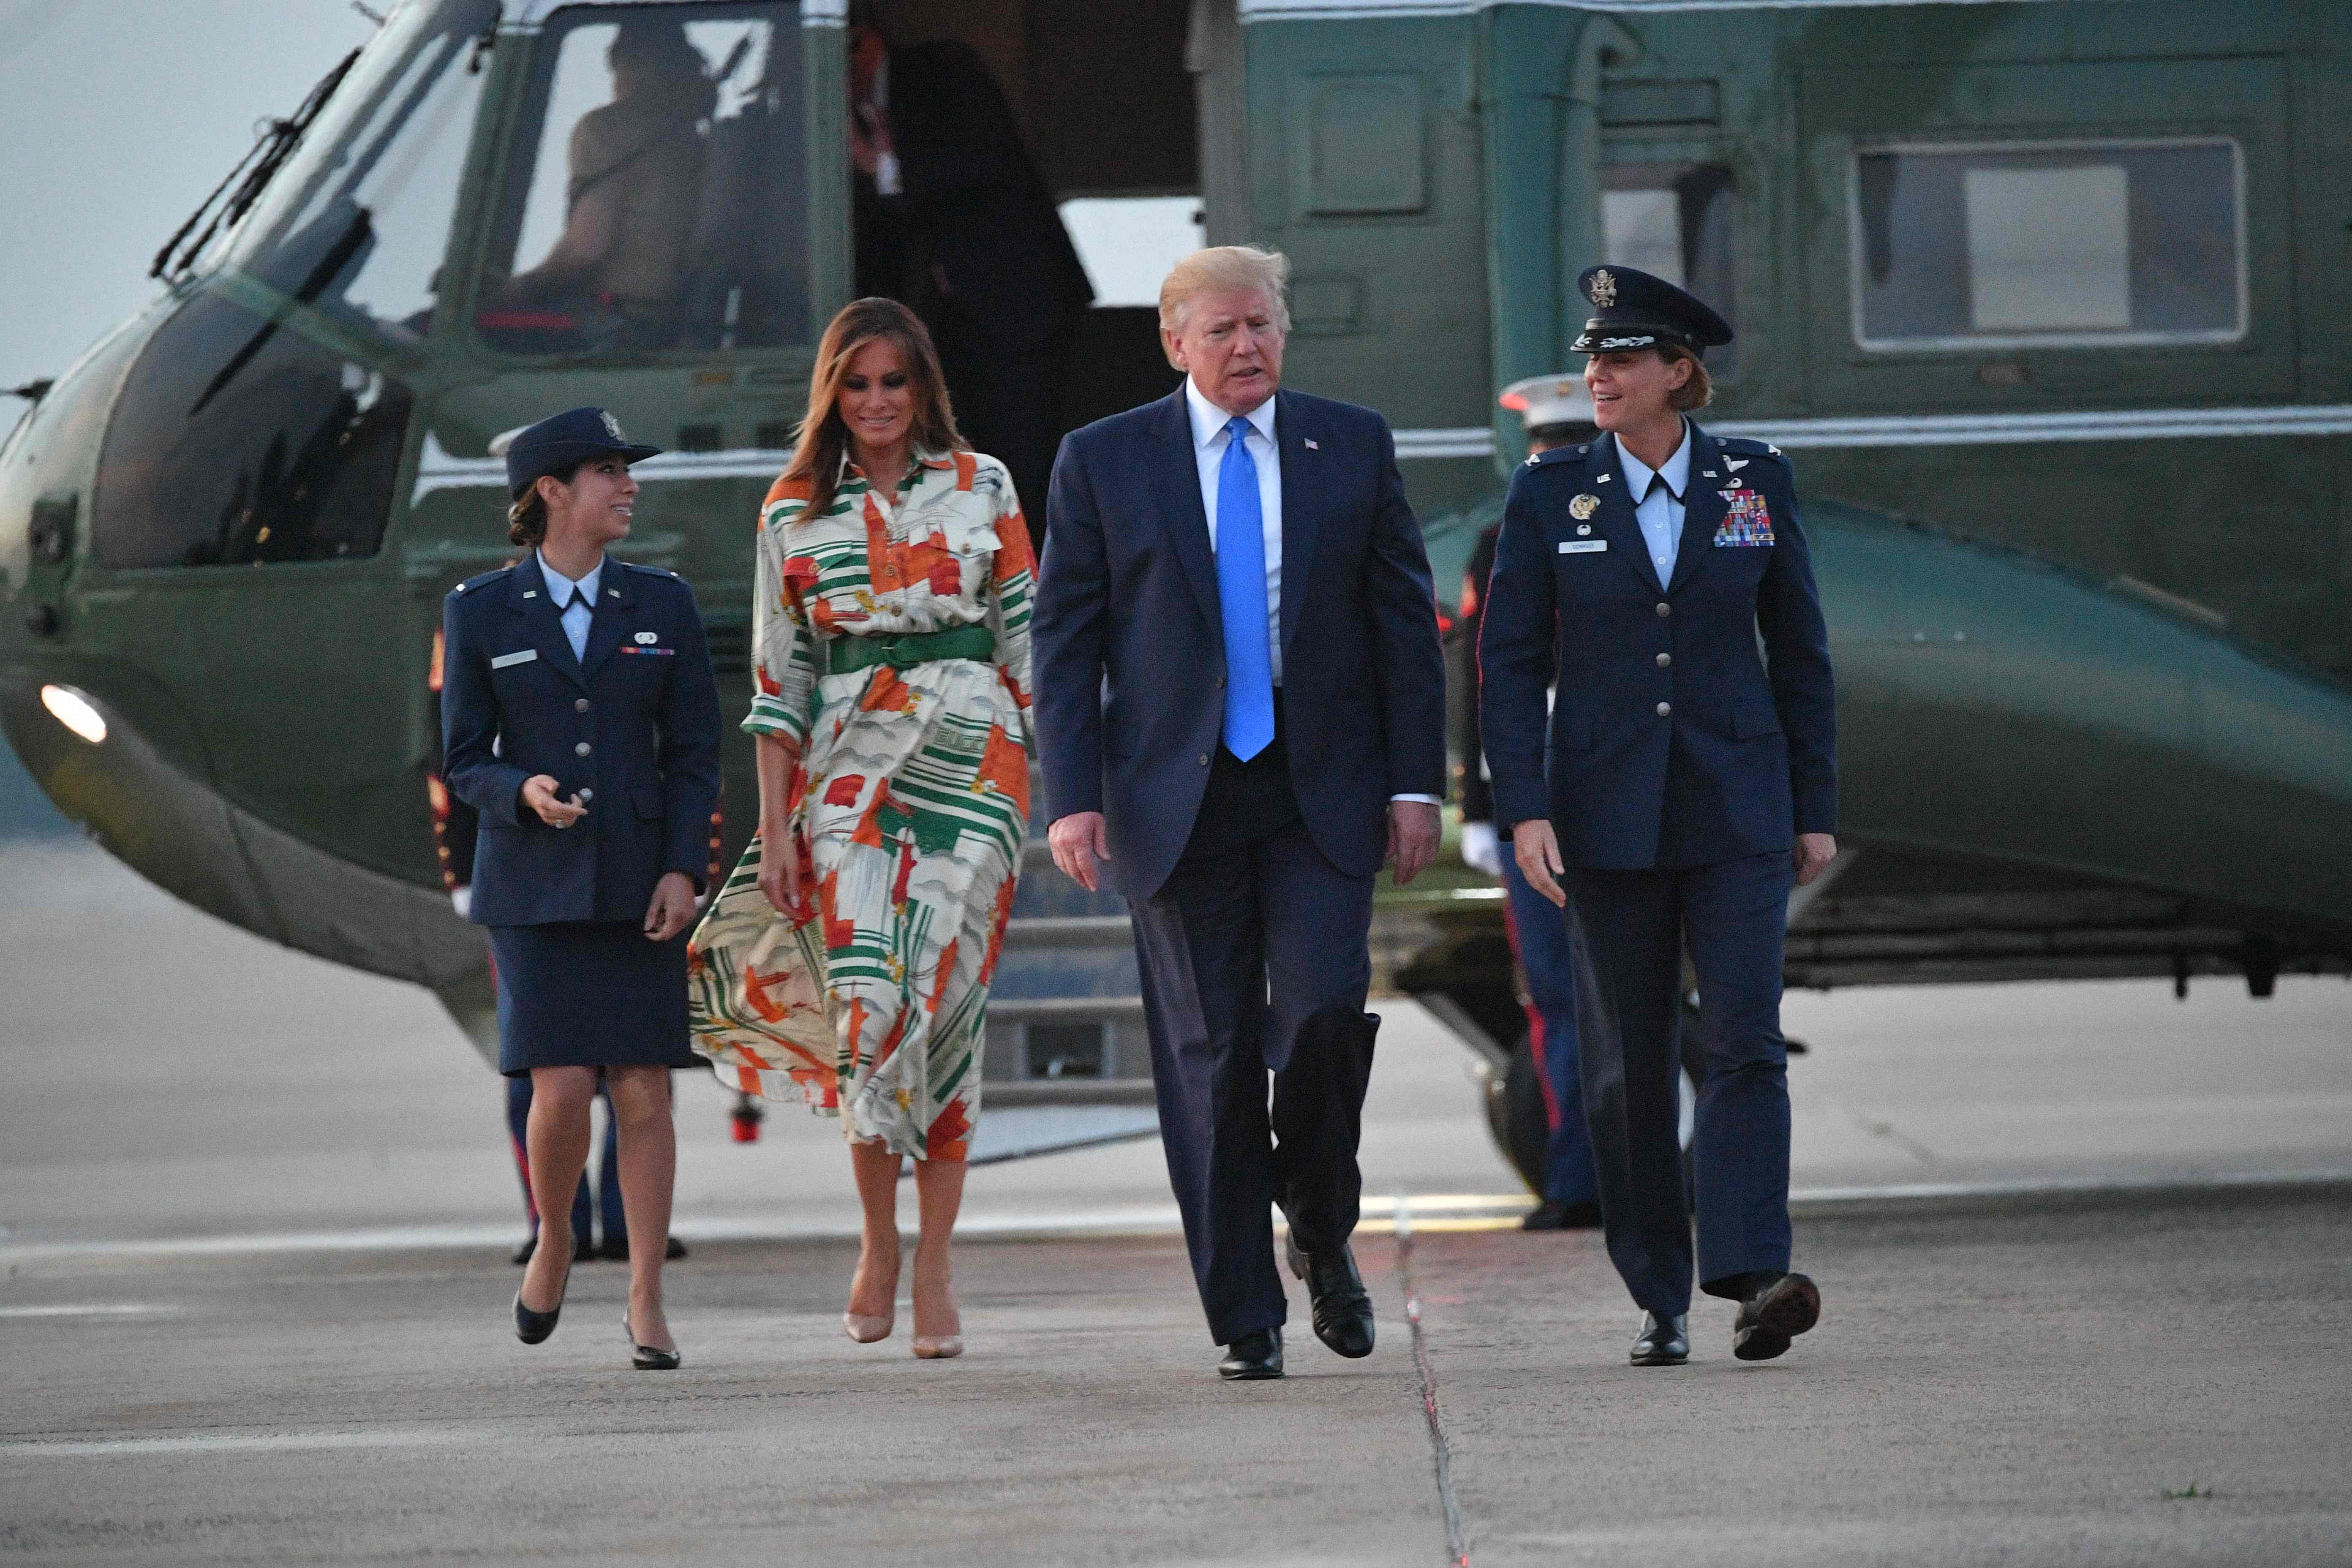  She chose this outfit for her flight f-rom Washington to London, with husband President Donald Trump